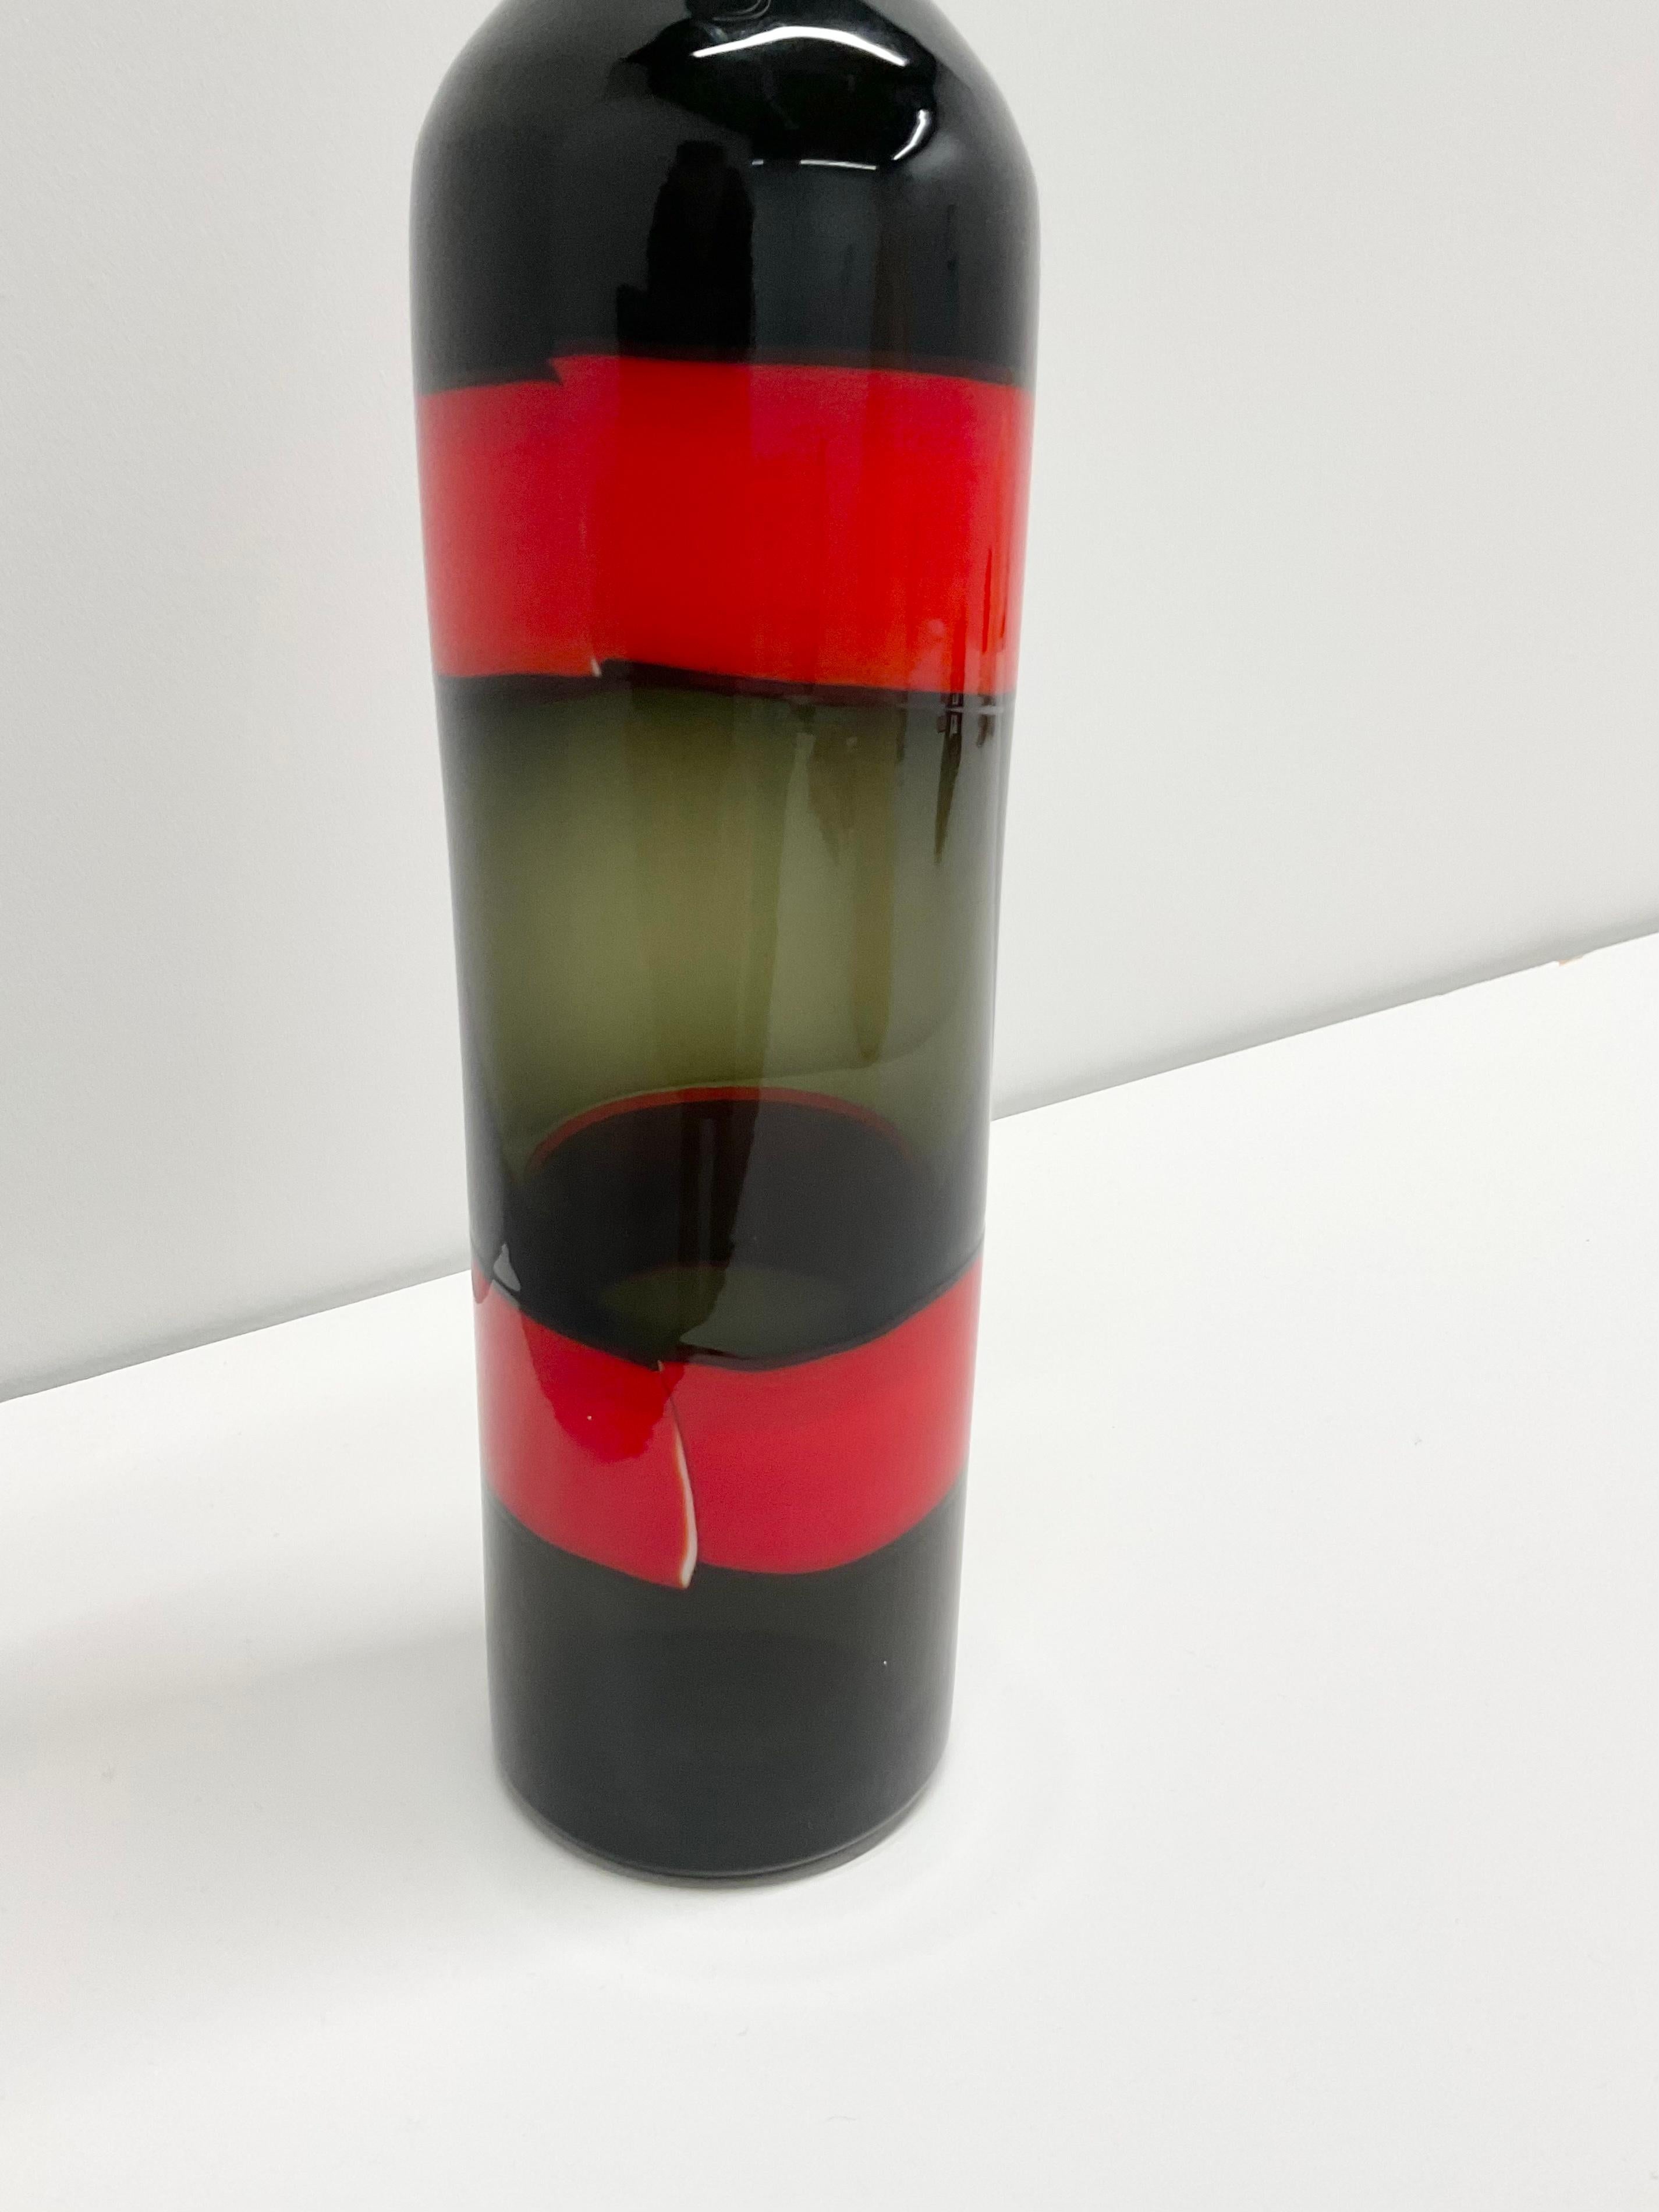 Polychromed Fasce “Orizzontali” Stoppered Bottle by Fulvio Bianconi, 1960s For Sale